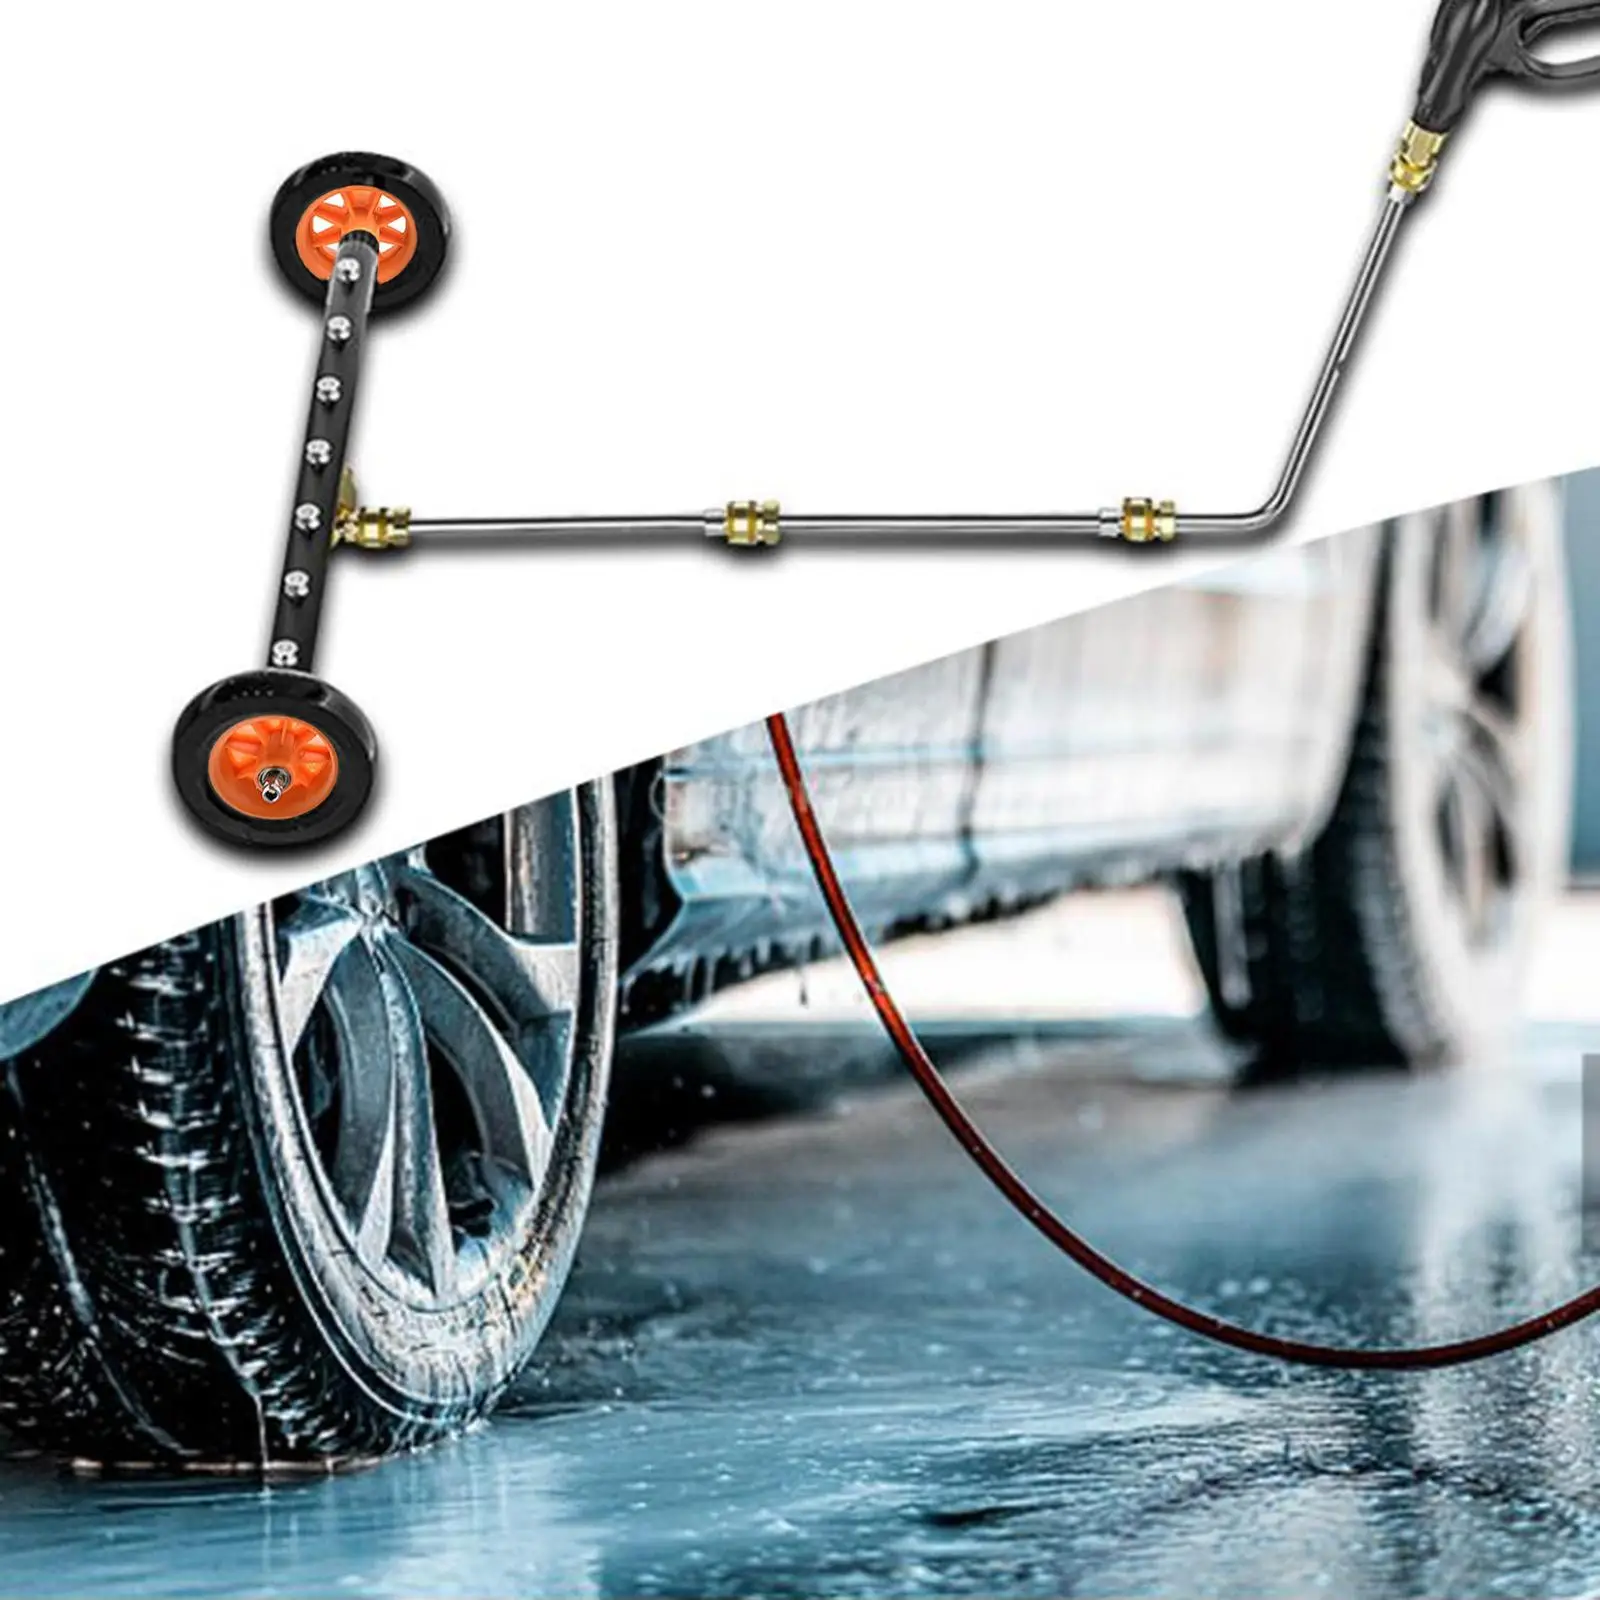 16 inch Undercarriage Washer Car Chassis Cleaning 90 Degree Angled Wands 4000PSI under Car Washer Water Broom for RV Truck SUV